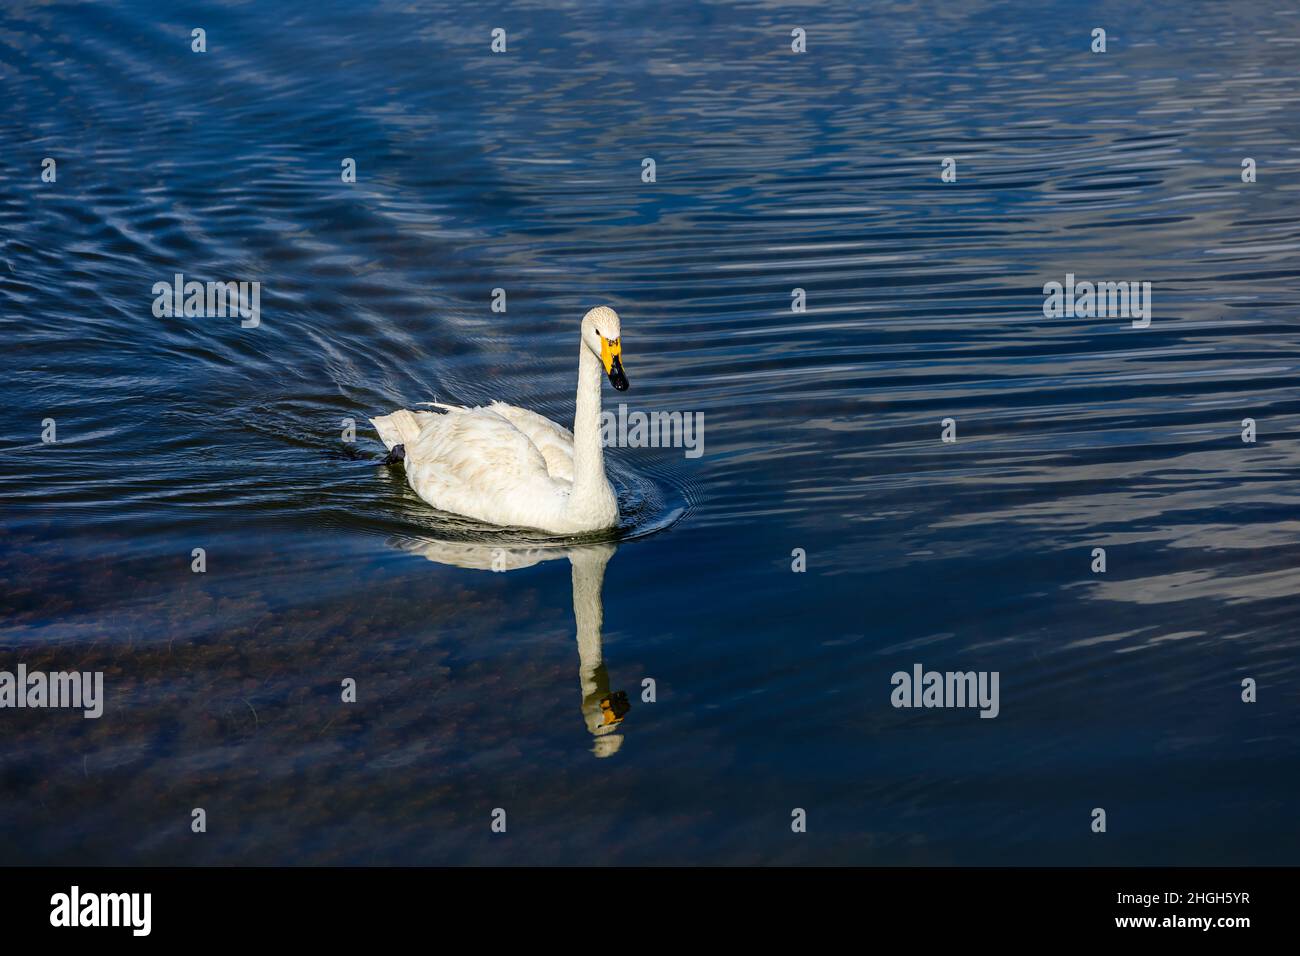 A white swan swimming in the water. Stock Photo